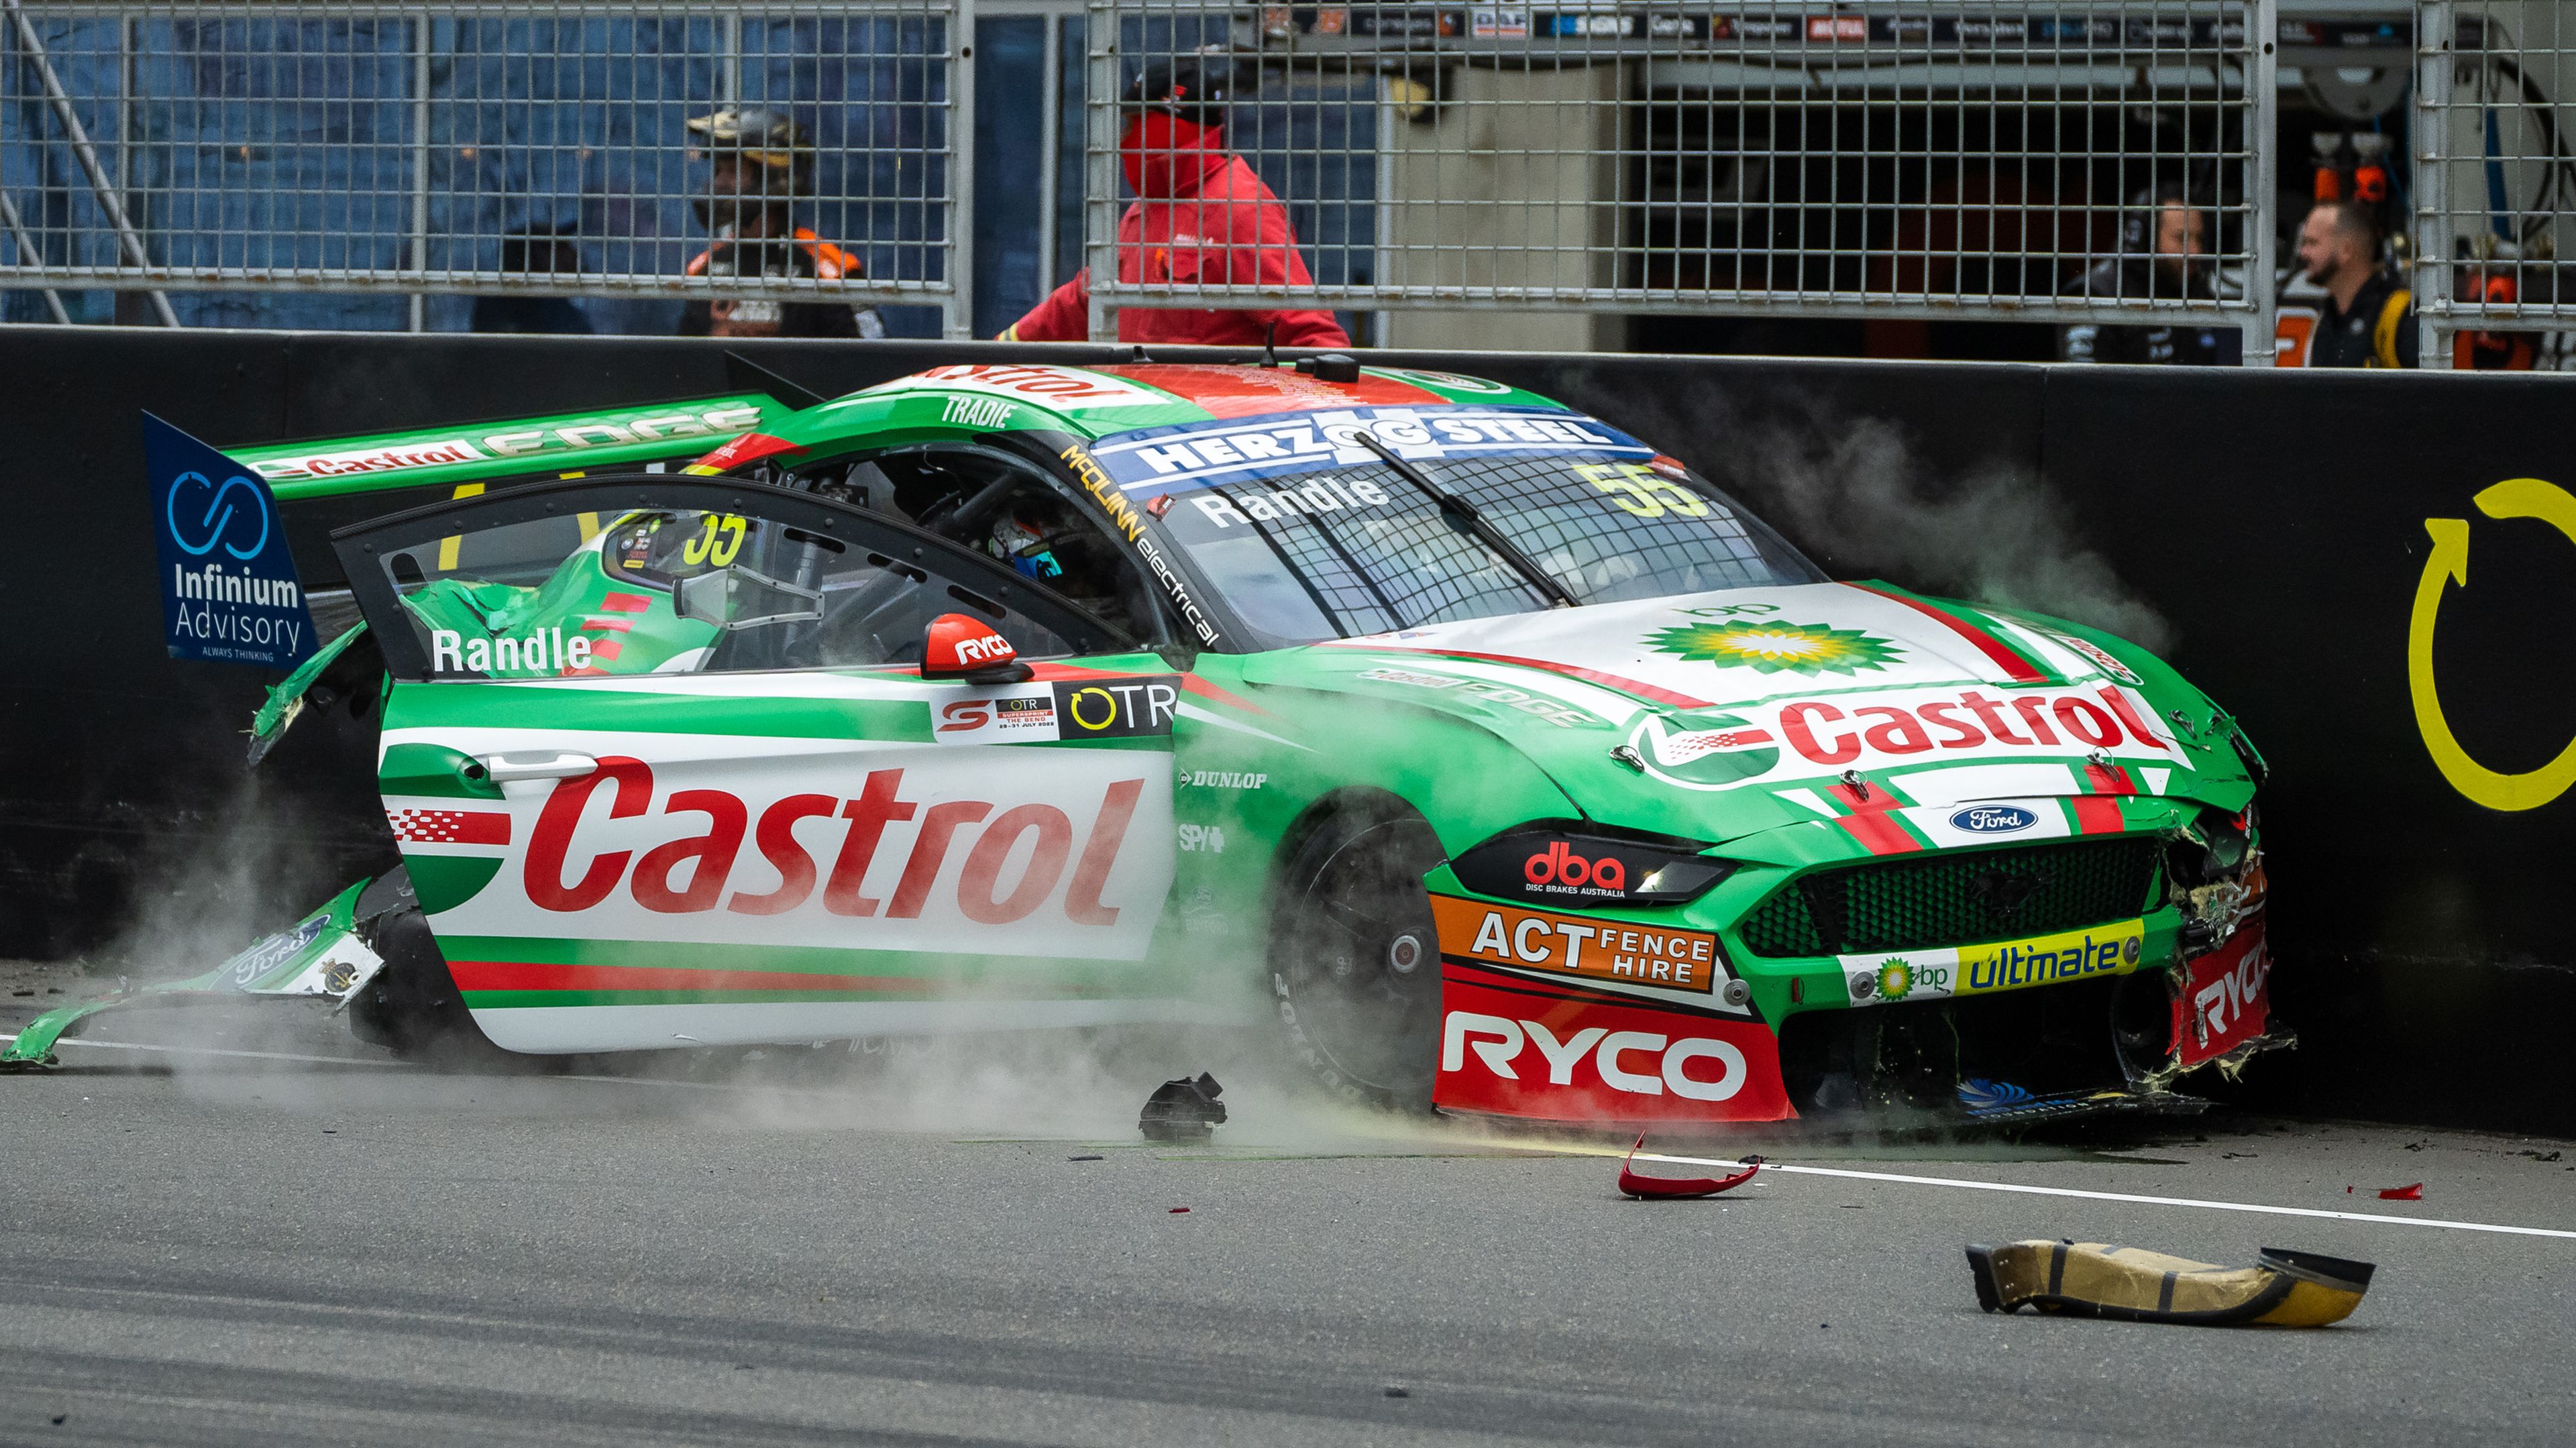 Thomas Randle driver of the #55 Castrol Racing Ford Mustang is pictured after being hit by Andre Heimgartner driver of the #8 Brad Jones Racing Holden Commodore ZB during race 2 of the OTR Supersprint round of the 2022 Supercars Championship Season at The Bend on July 30, 2022 in Tailem Bend, Australia. (Photo by Daniel Kalisz/Getty Images)